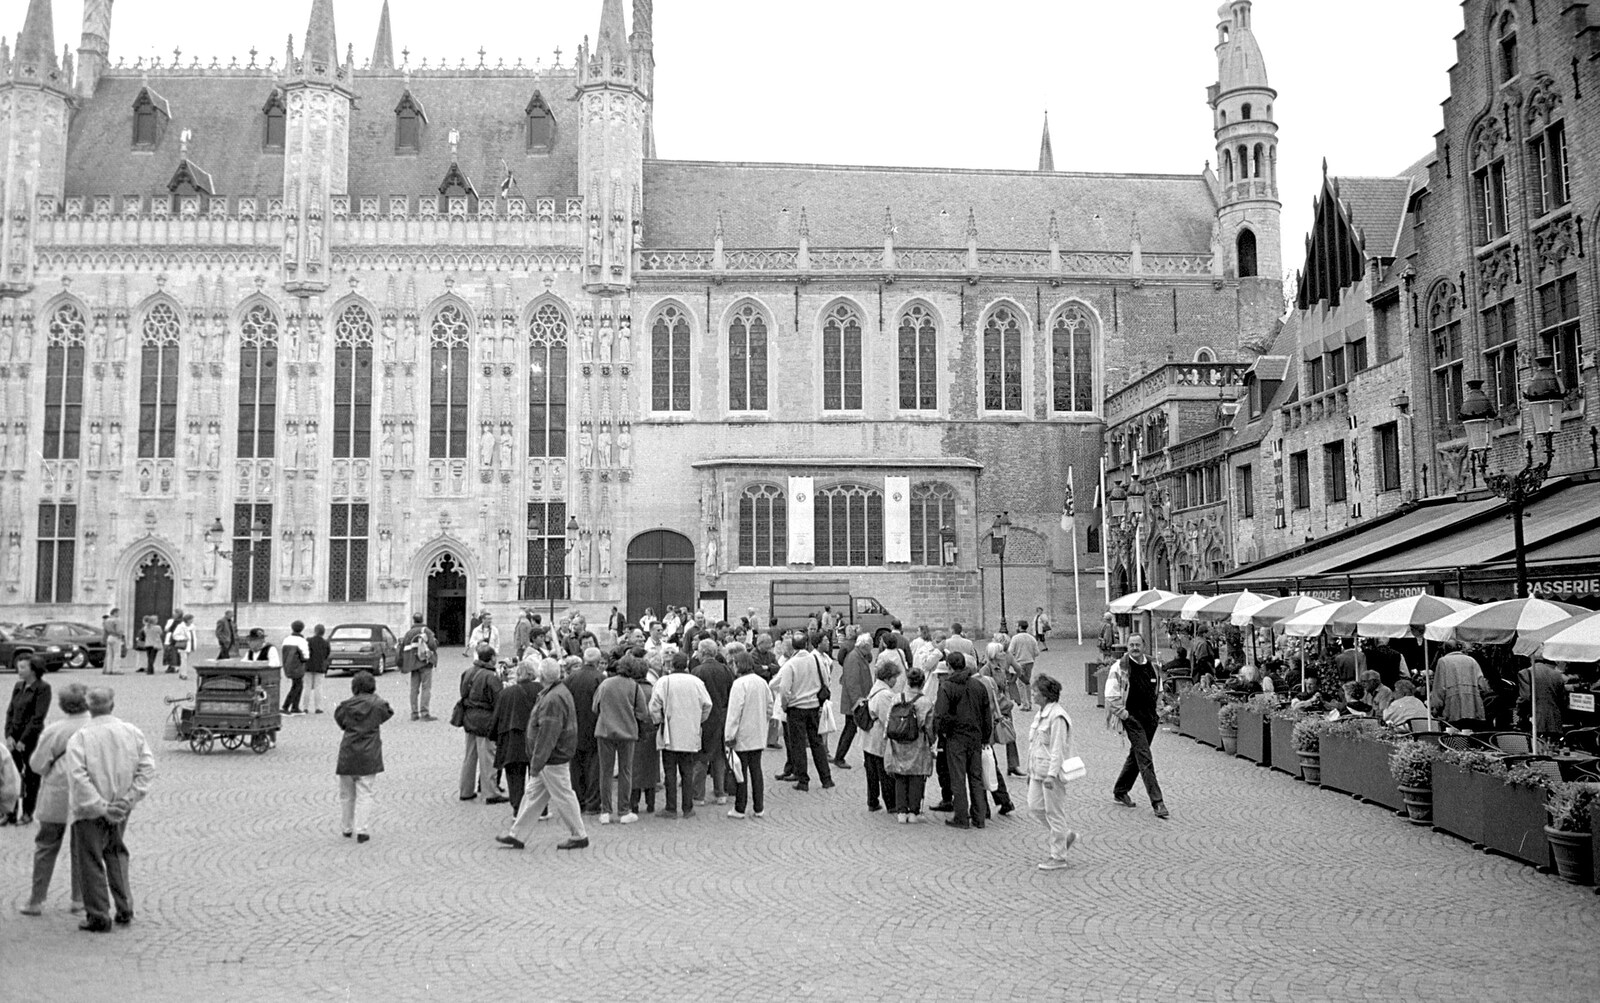 Cafés around the edge of the Grande Place from CISU: An SCC Day-Trip to Bruges, Belgium - 26th May 2000